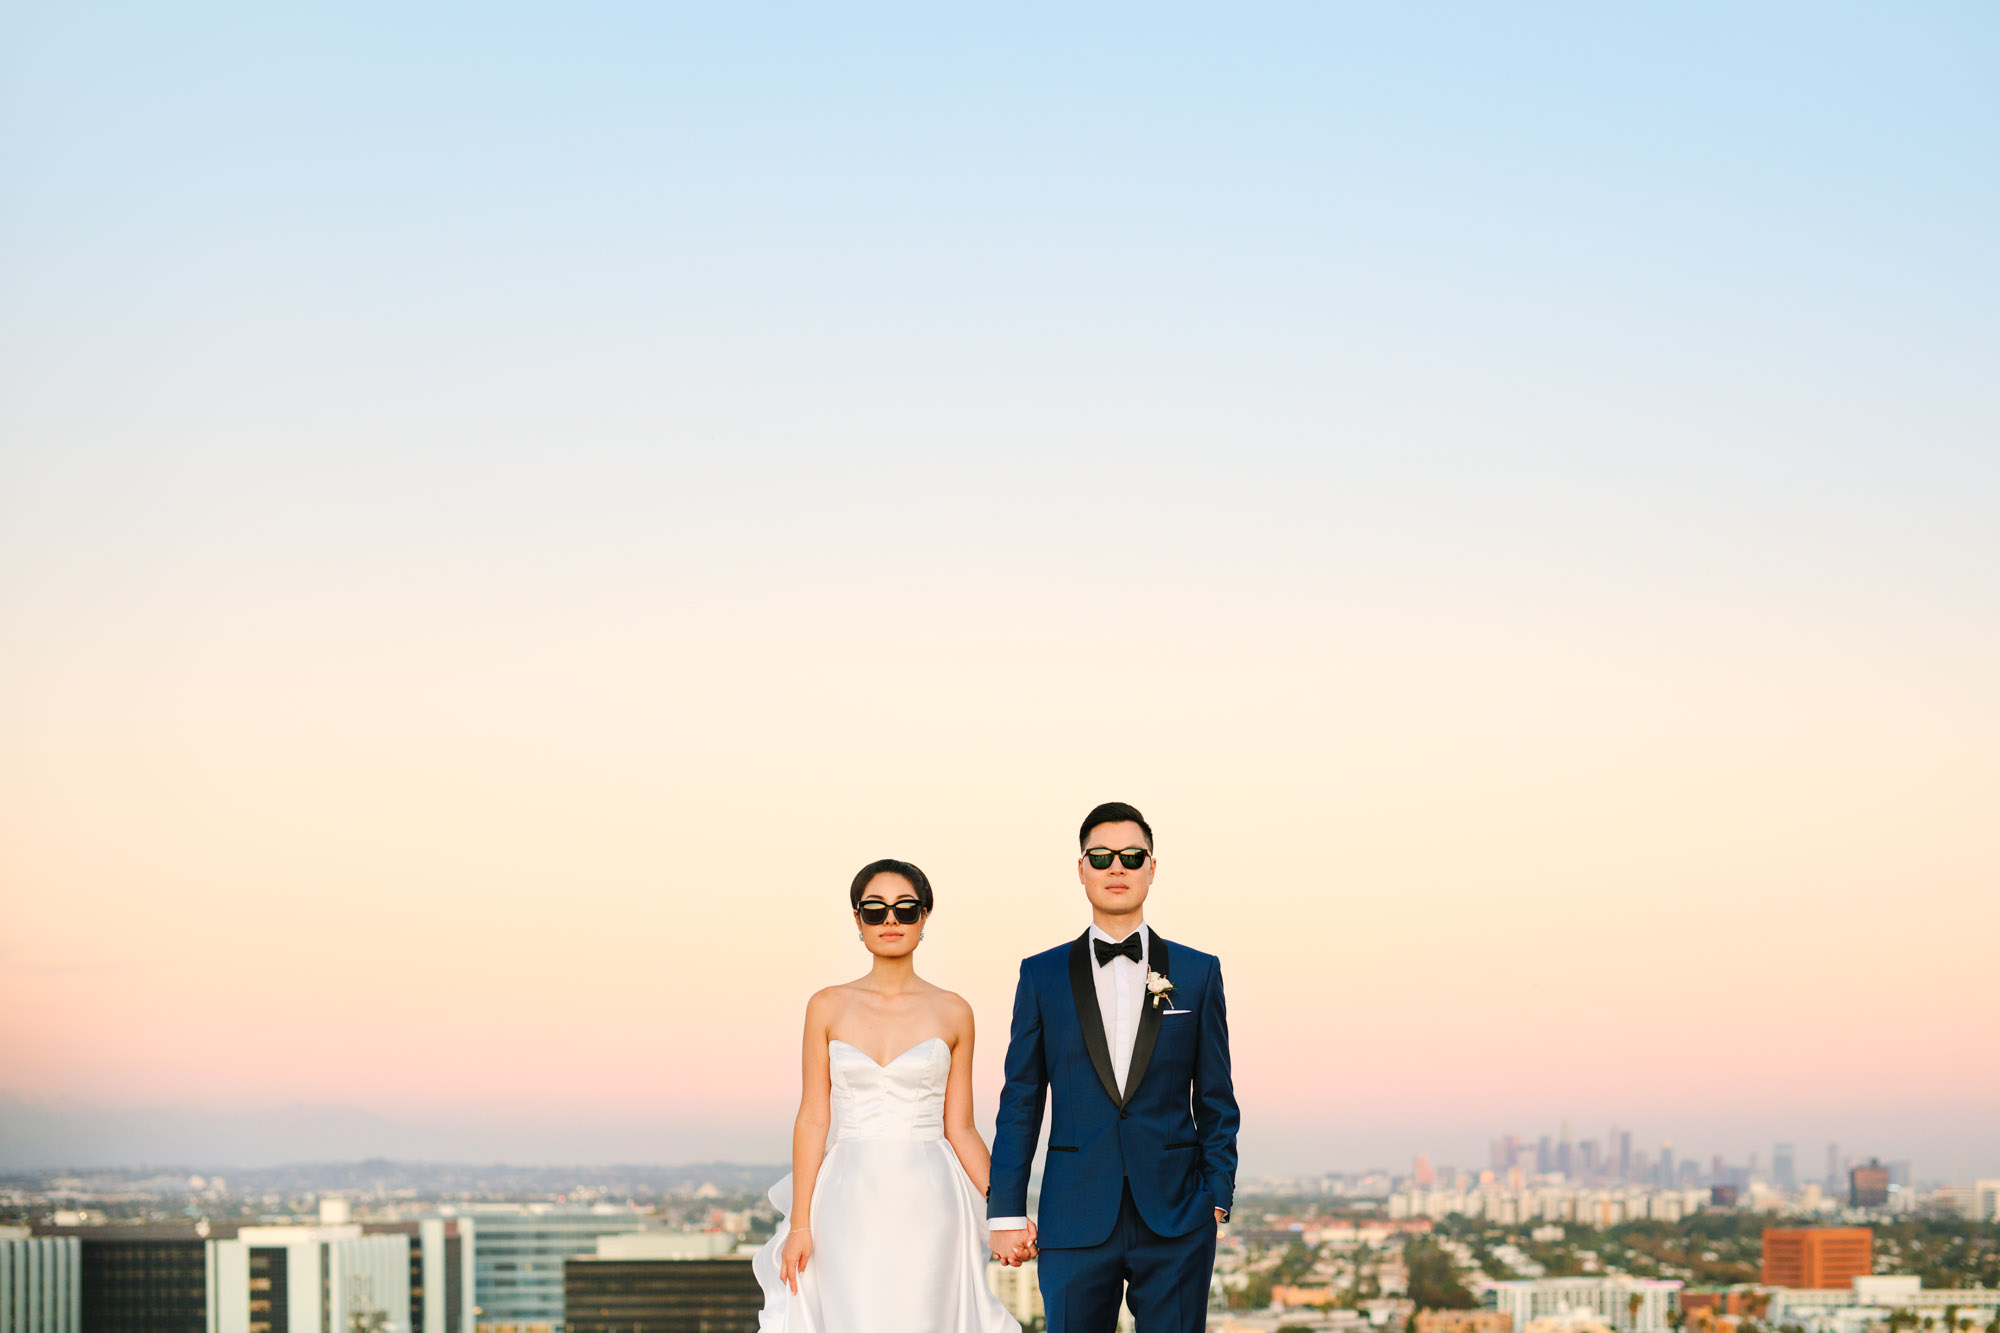 Bride and groom in sunglasses with Los Angeles skyline Indian Fusion wedding at Fig House Los Angeles by Mary Costa Photography